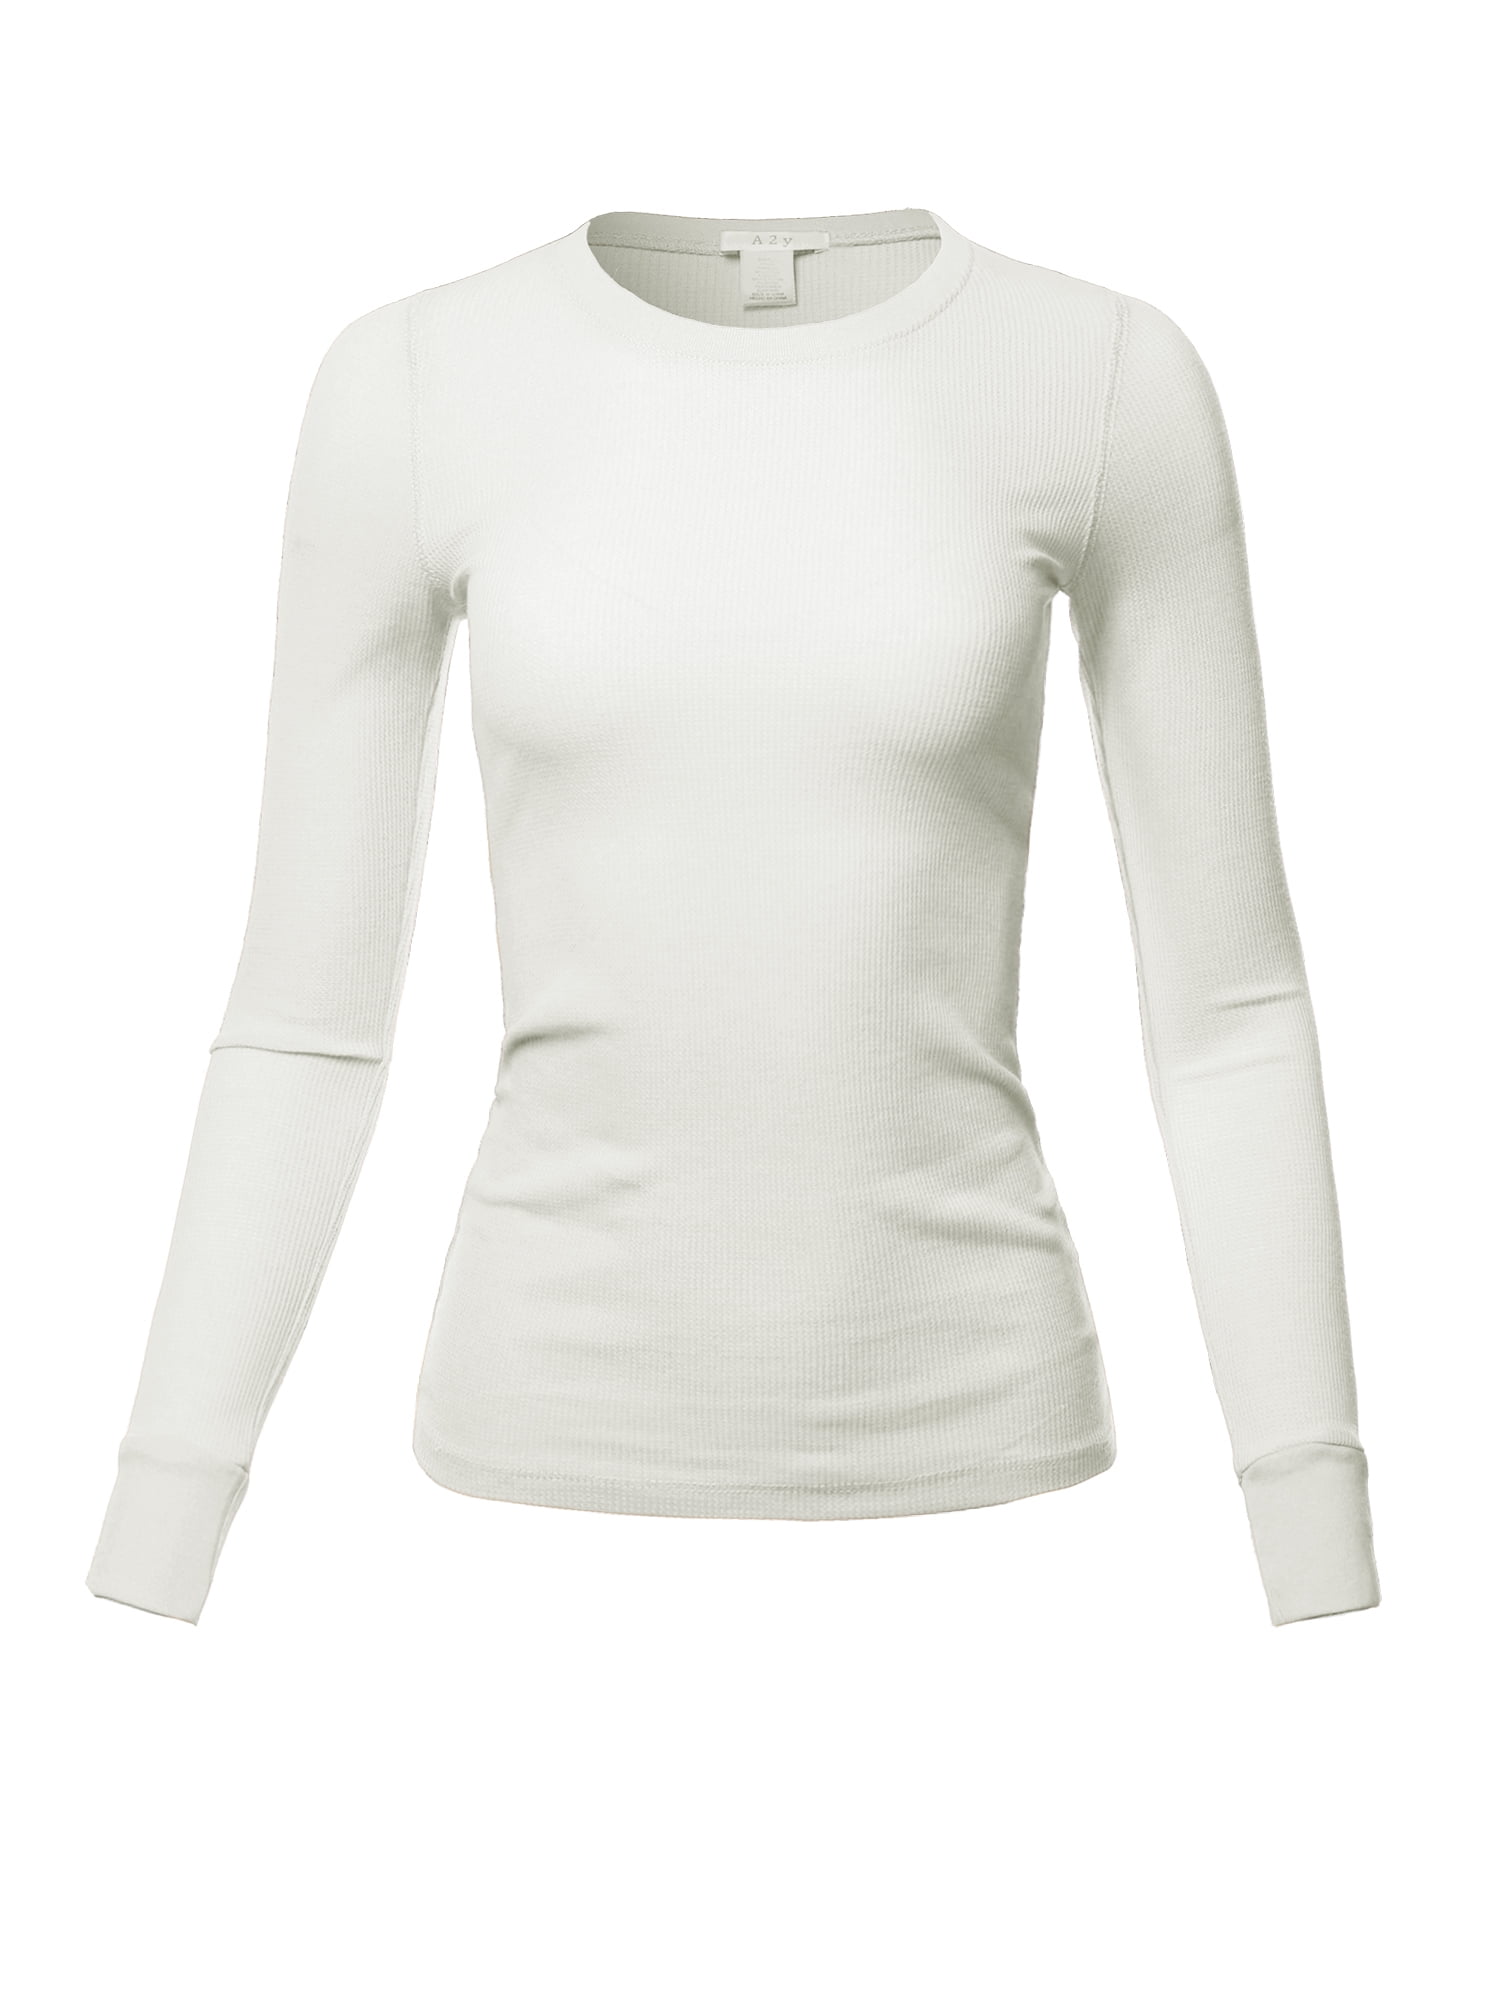 A2y Women S Basic Solid Fitted Long Sleeve Crew Neck Thermal Top Shirt